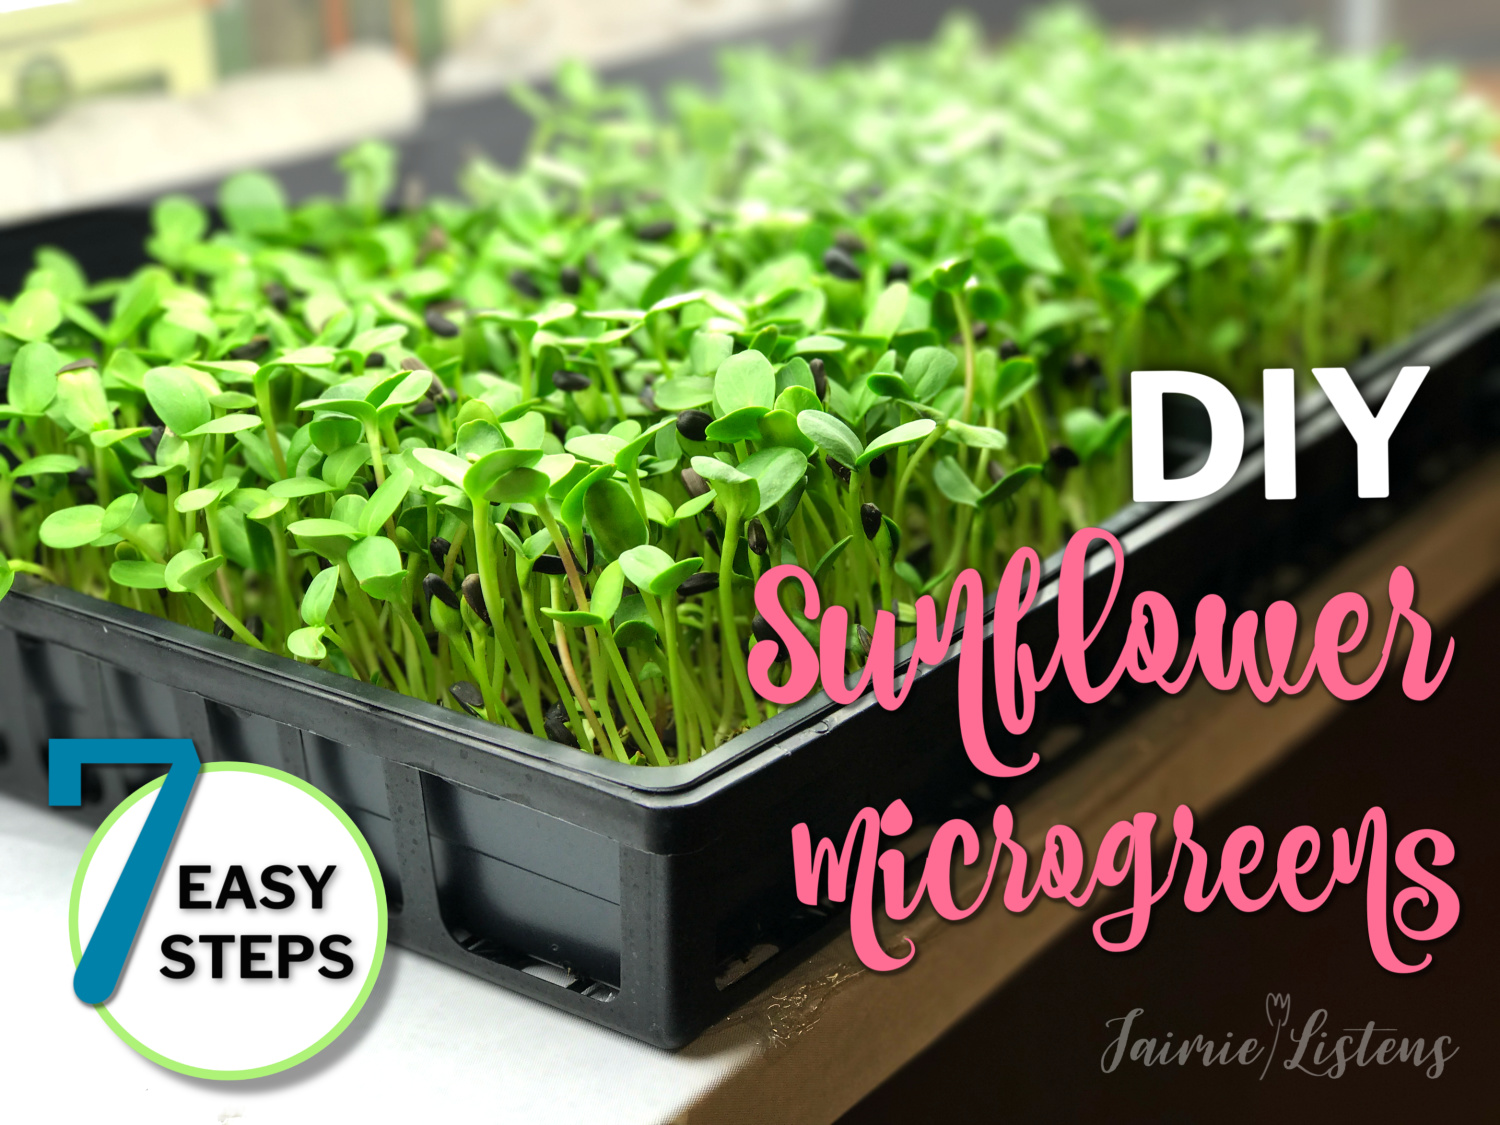 DIY Sunflower Microgreens in 7 Easy Steps - Jaimie Listens: Growing sunflower microgreens is easy, inexpensive and fun! I show you the best practices for the most delicious harvest!